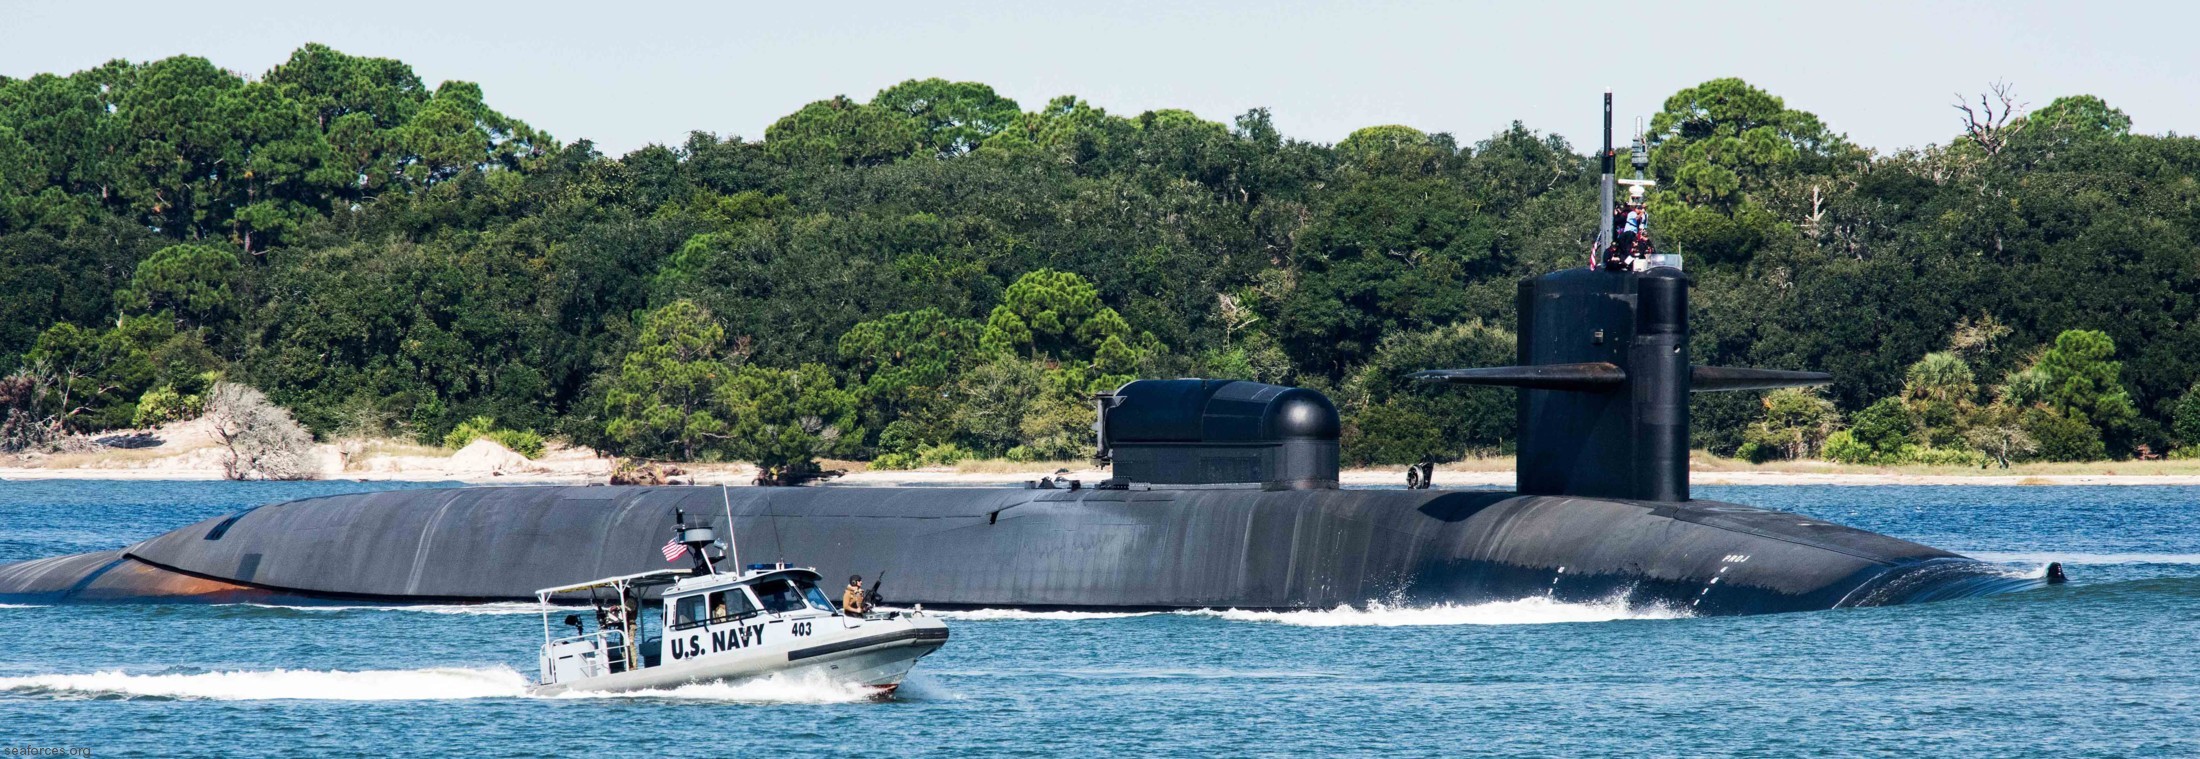 ssgn-729 uss georgia guided missile submarine 2015 04 naval submarine base kings bay